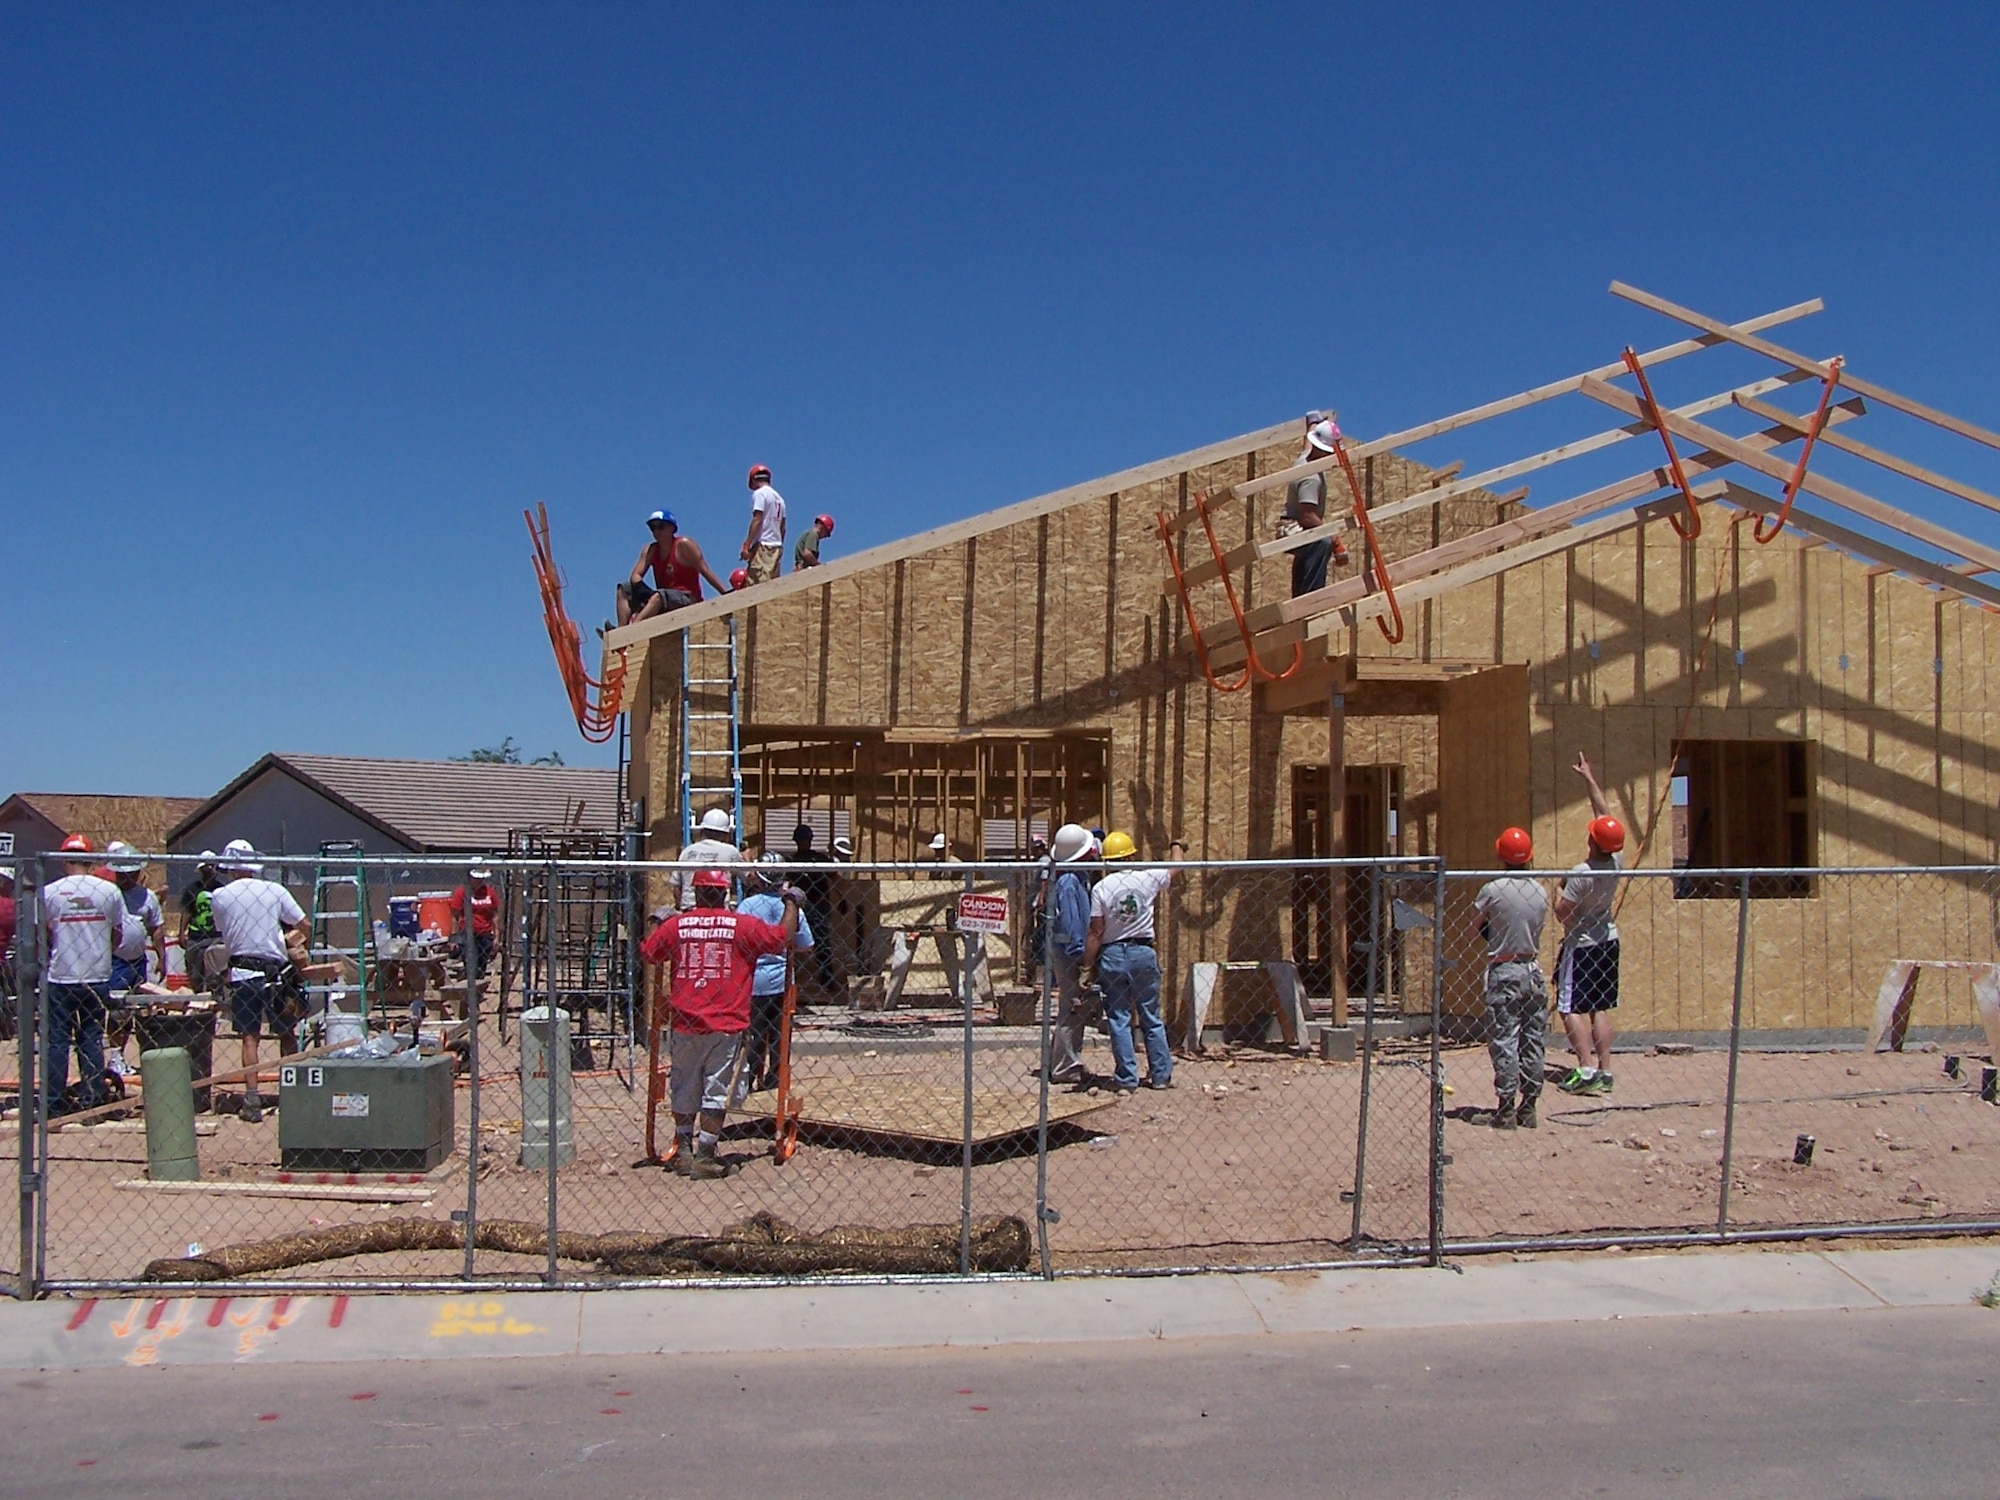 More than 30 Airmen from Davis-Monthan AFB came together to donate six hours of their off-duty time to build homes in support of the local community for Habitat for Humanity in Tucson, May 30. (Courtesy Photo/Released).